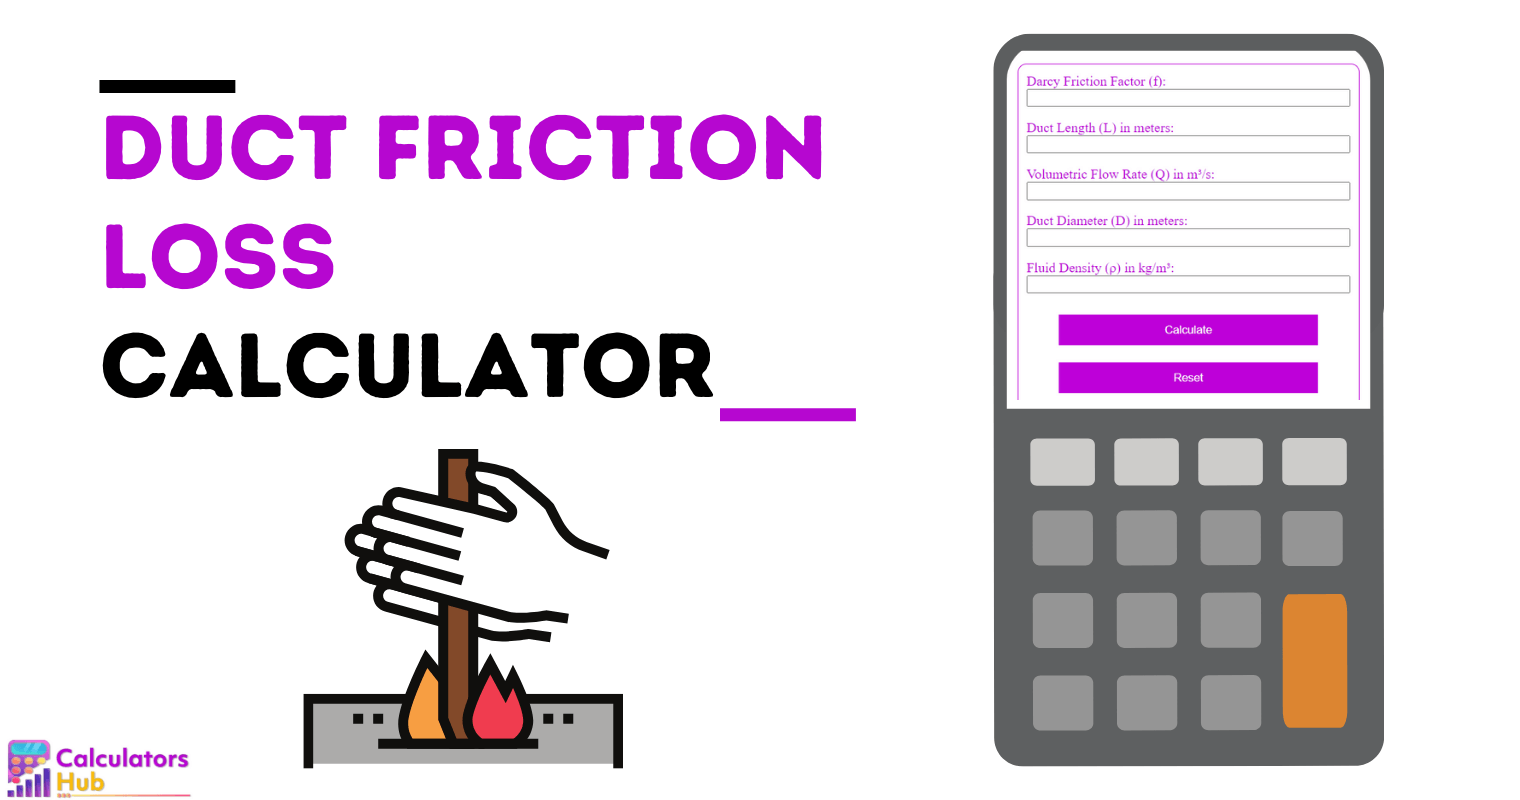 Duct Friction Loss Calculator